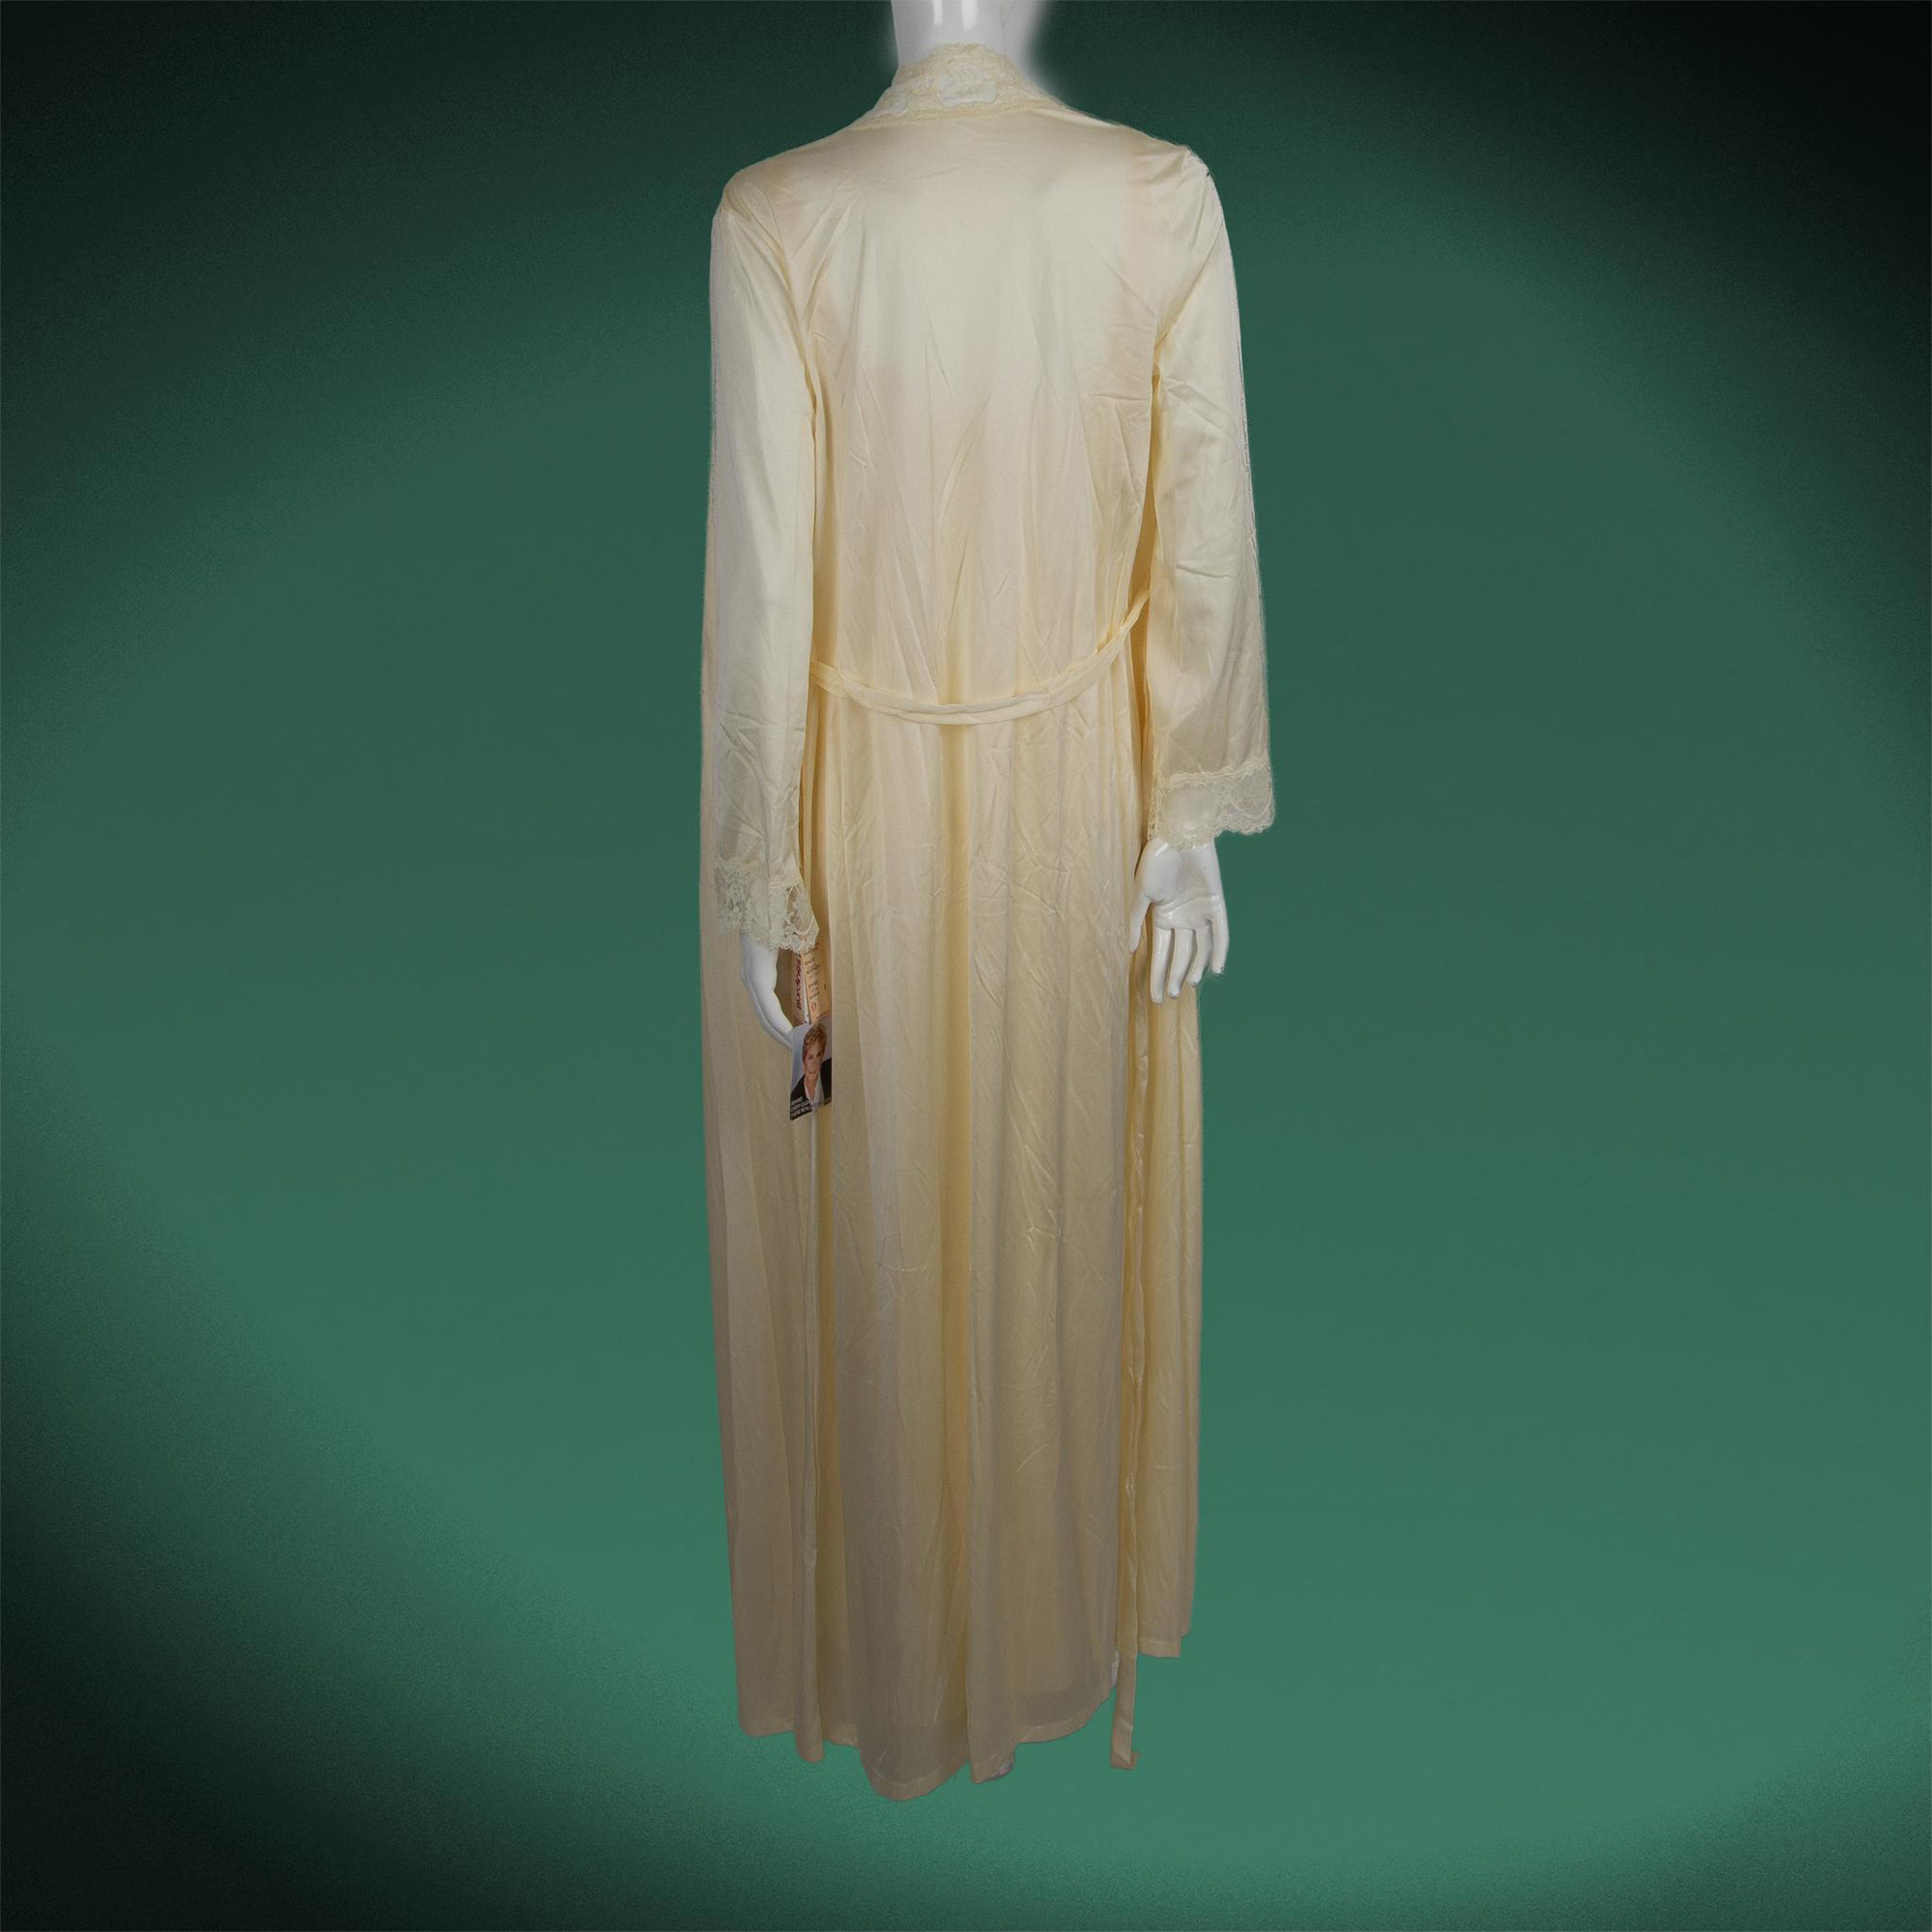 Vintage Olga Buttercup Robe and Gown, Size Small - Image 4 of 6